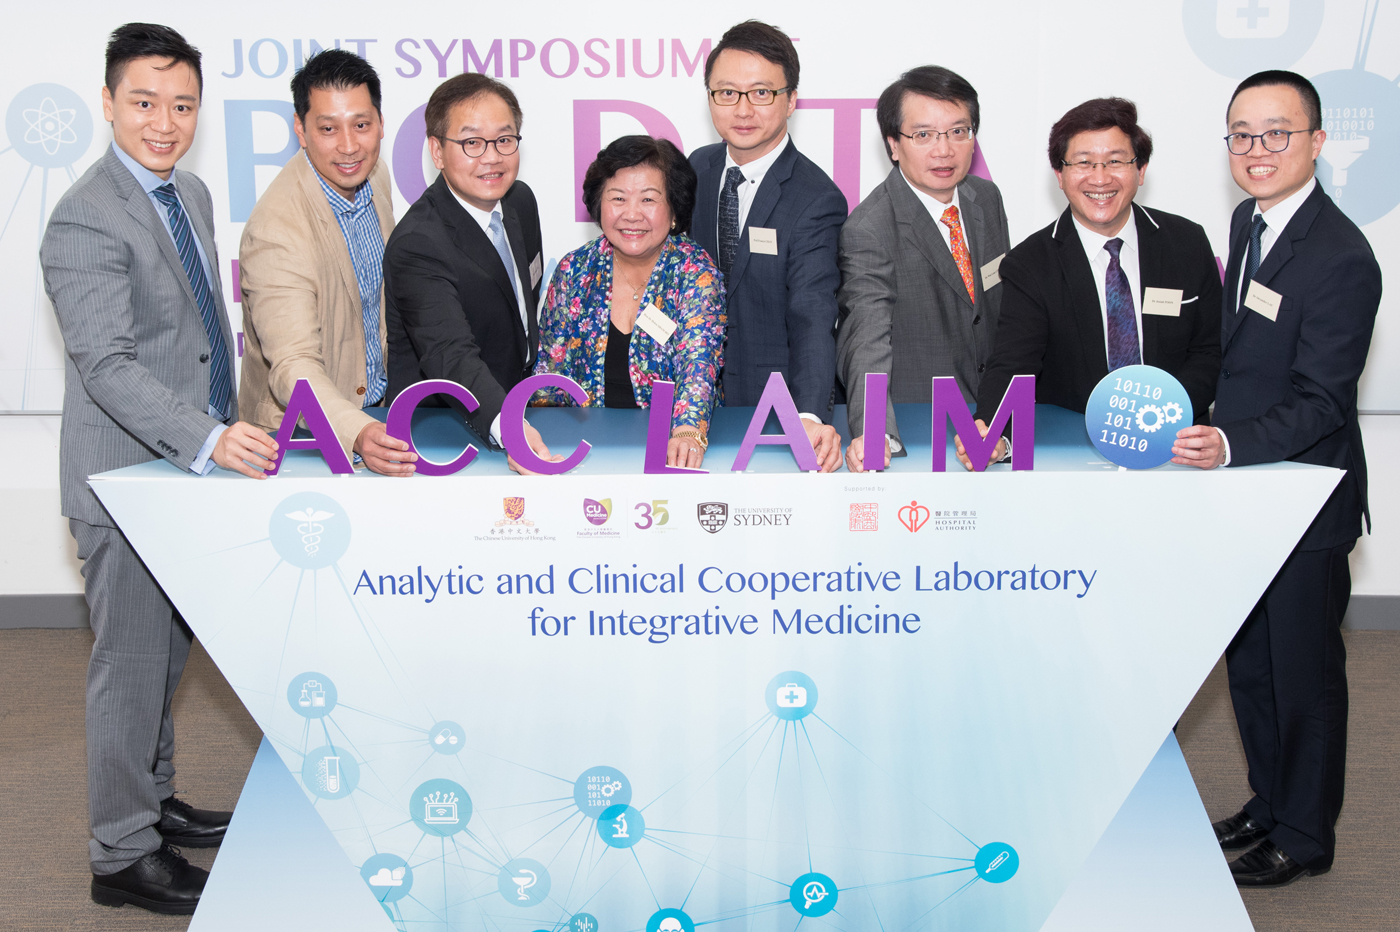 Analytic and Clinical Cooperative Laboratory for Integrative Medicine